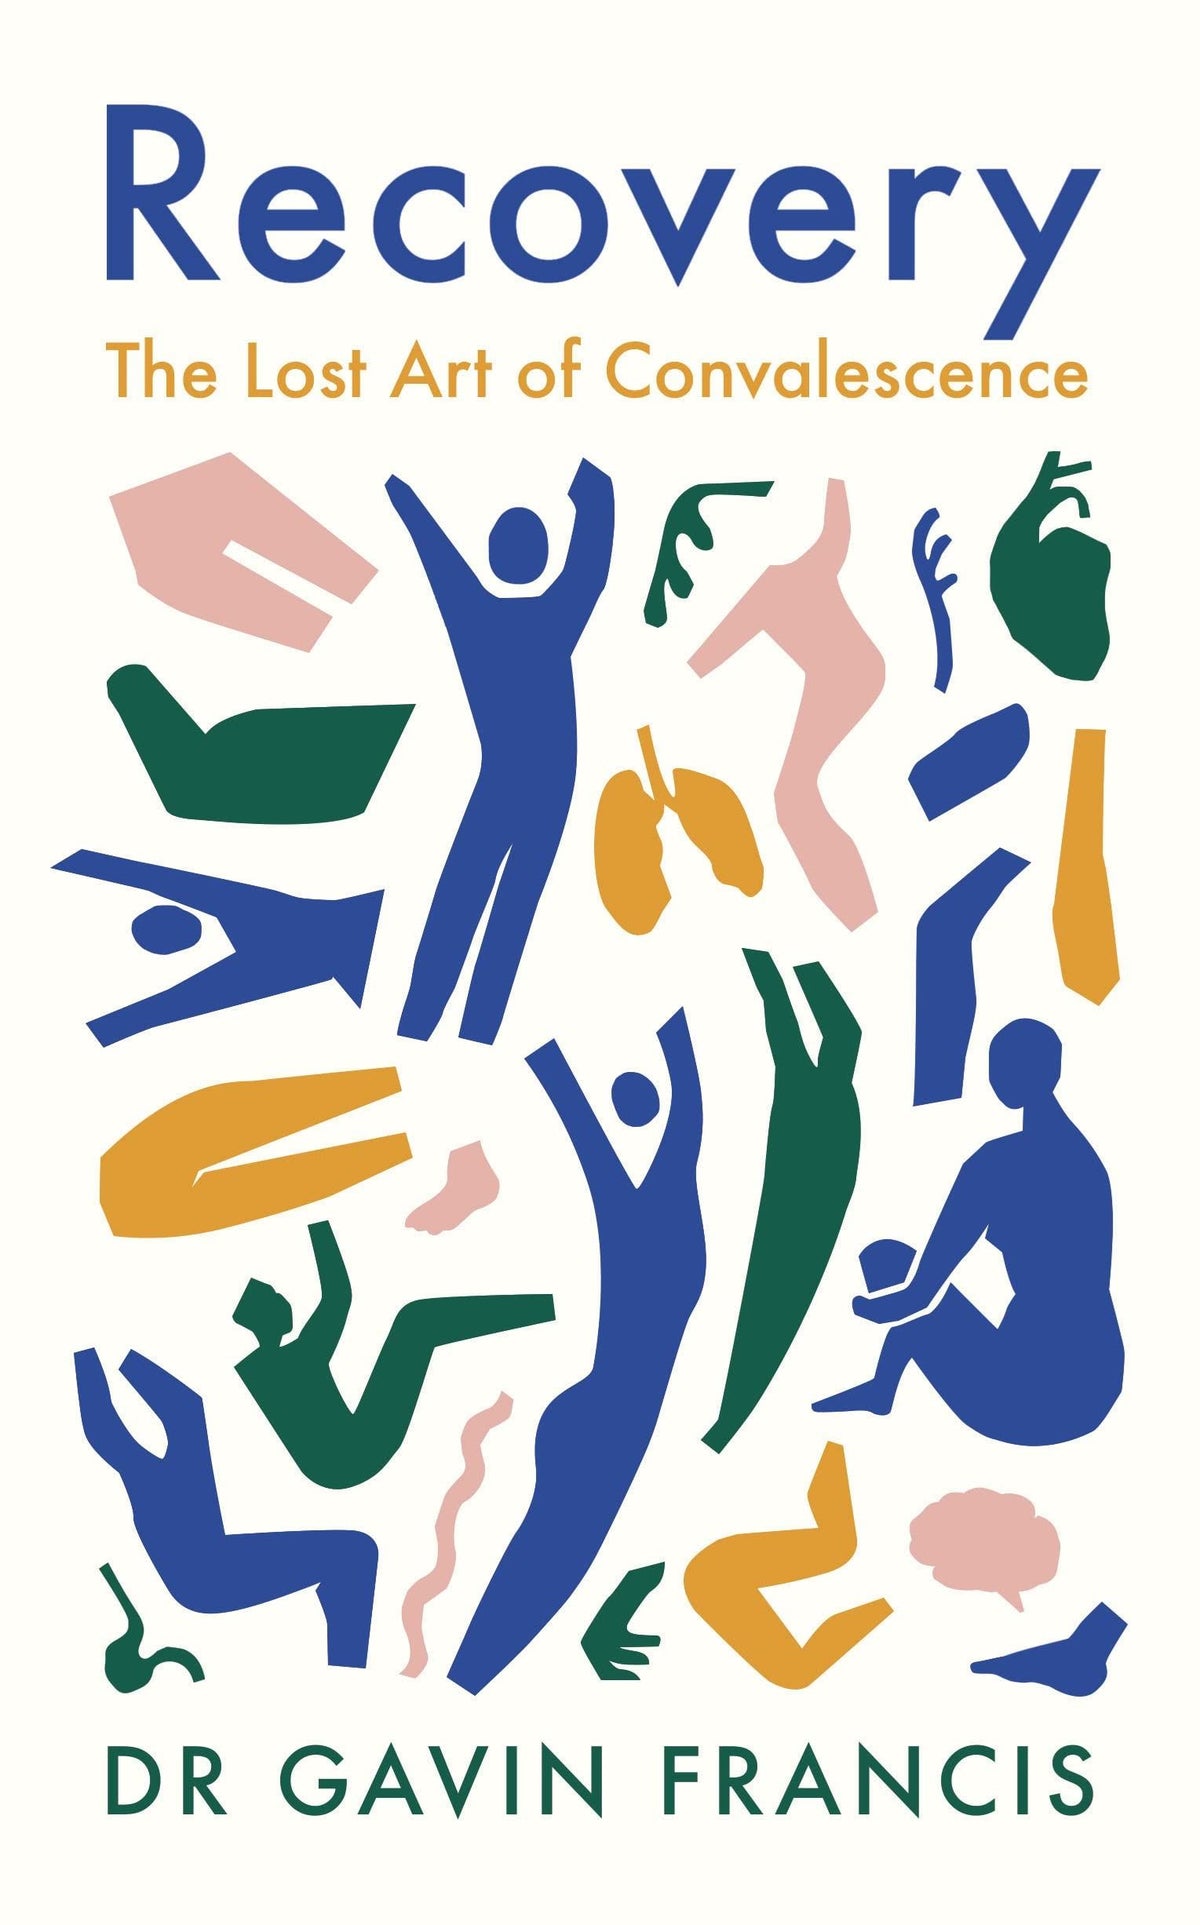 Book - Recovery: The Lost Art of Convalescence